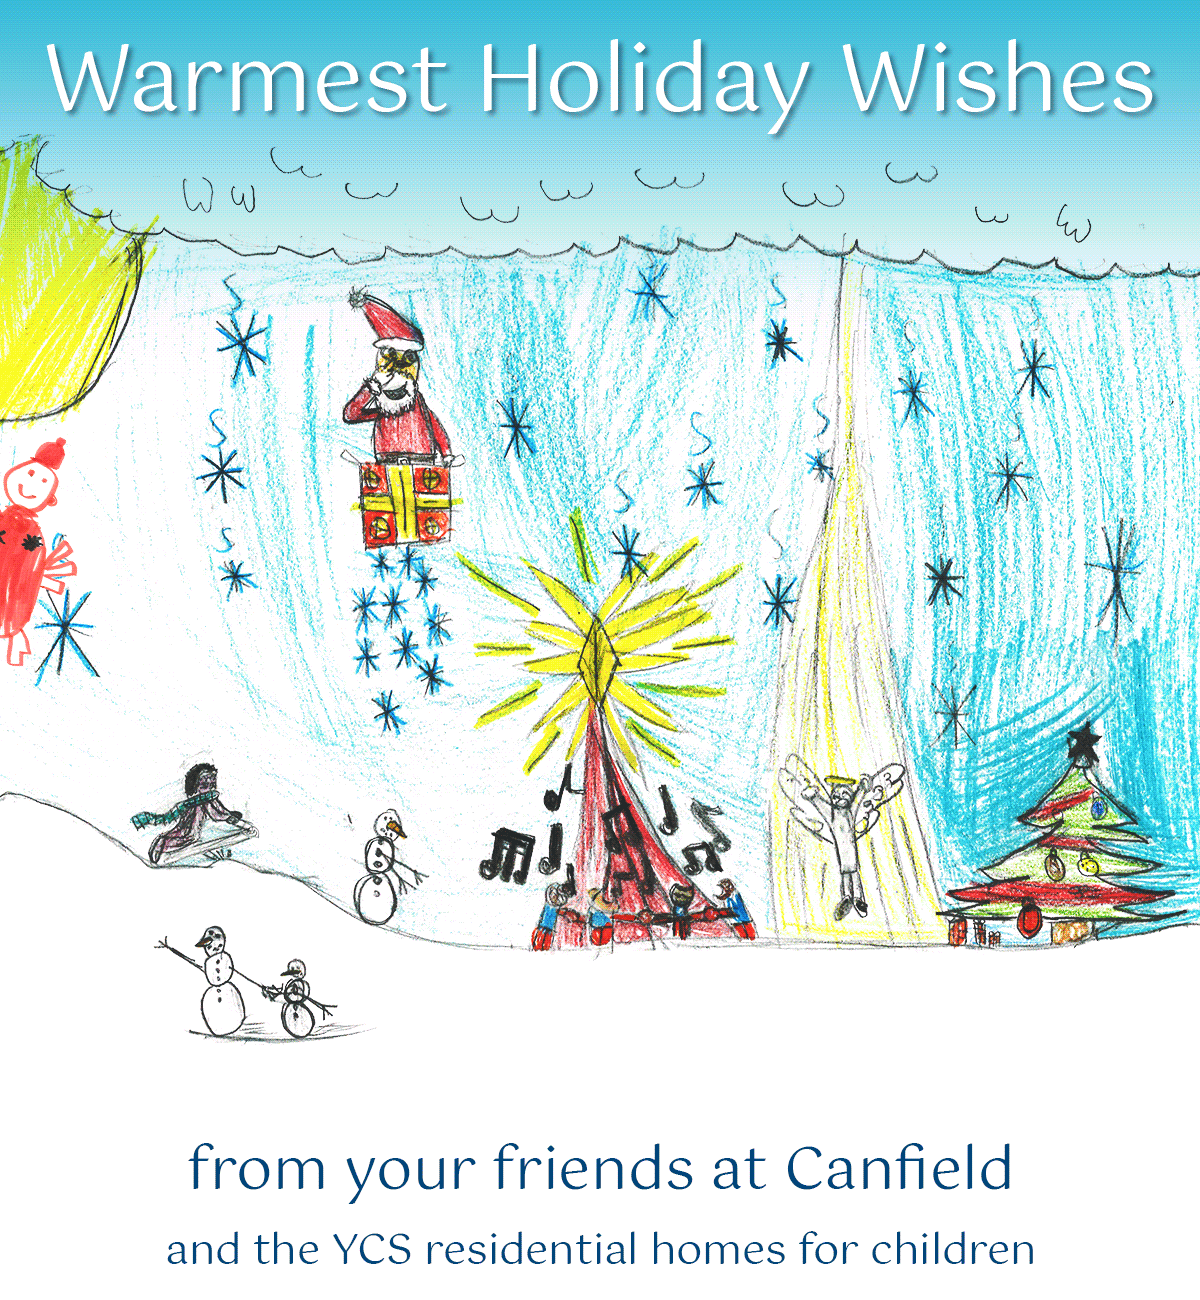 Happy Holidays and a Happy New Year from Canfield and YCS!